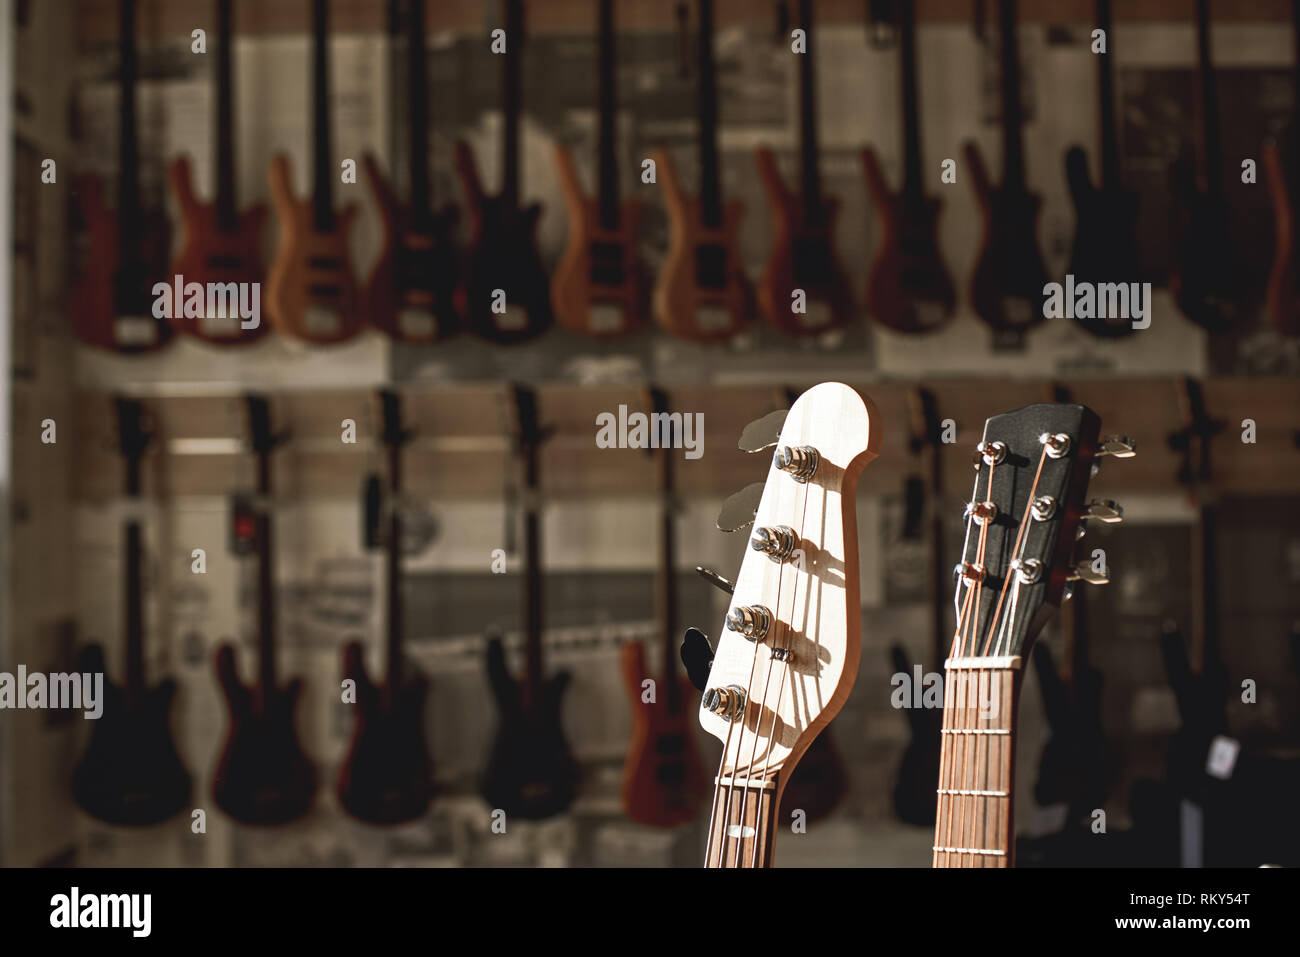 Close-up view of two guitar headstocks againt of a row of different electric guitars aligned in a music store showroom. Musical instruments. Music store. Guitar body Stock Photo